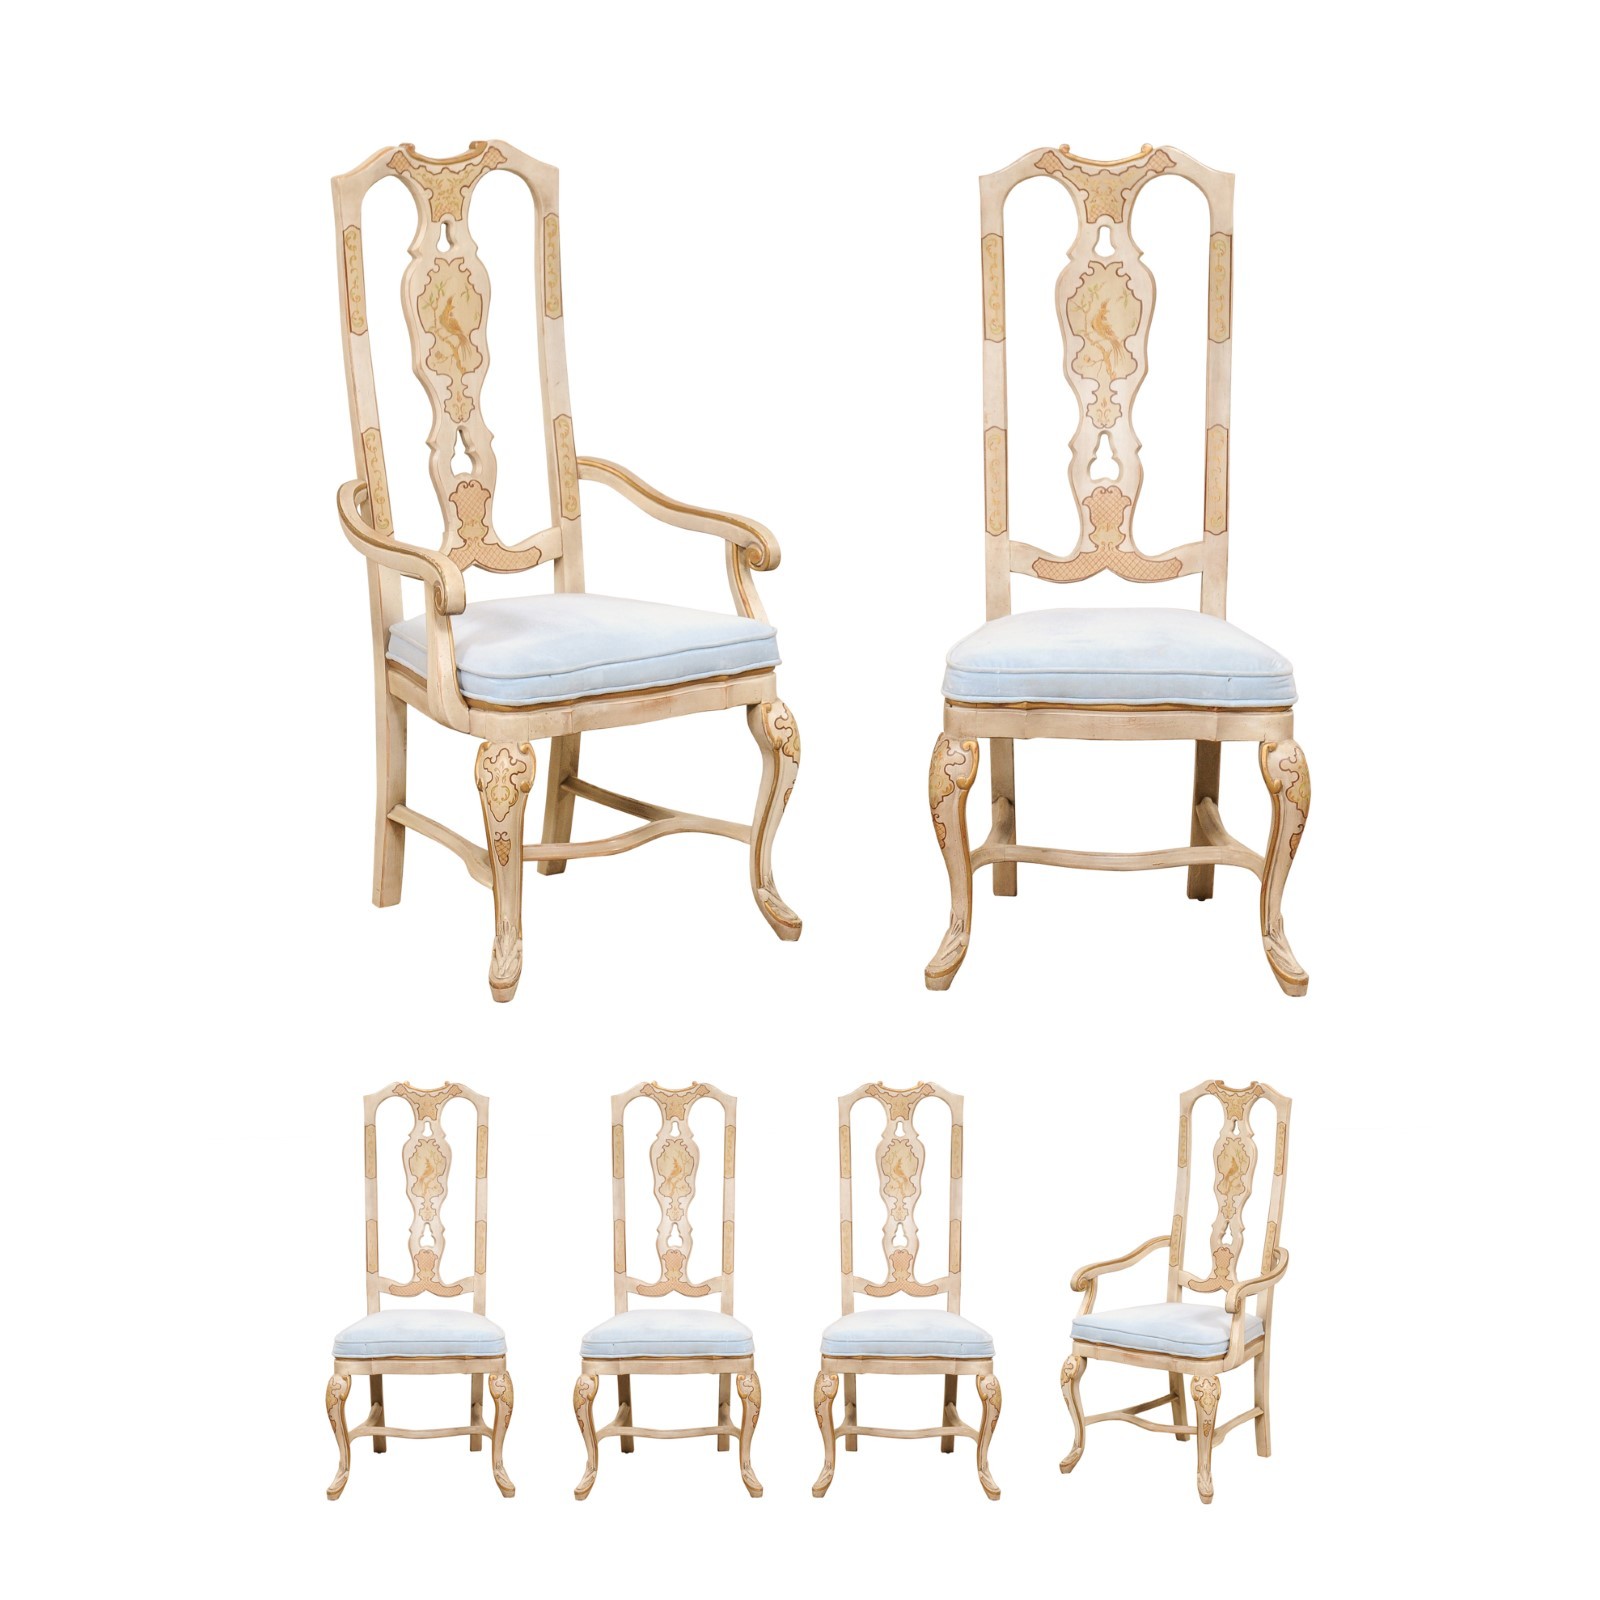 Set of 6 English Chinoiserie Style Chairs